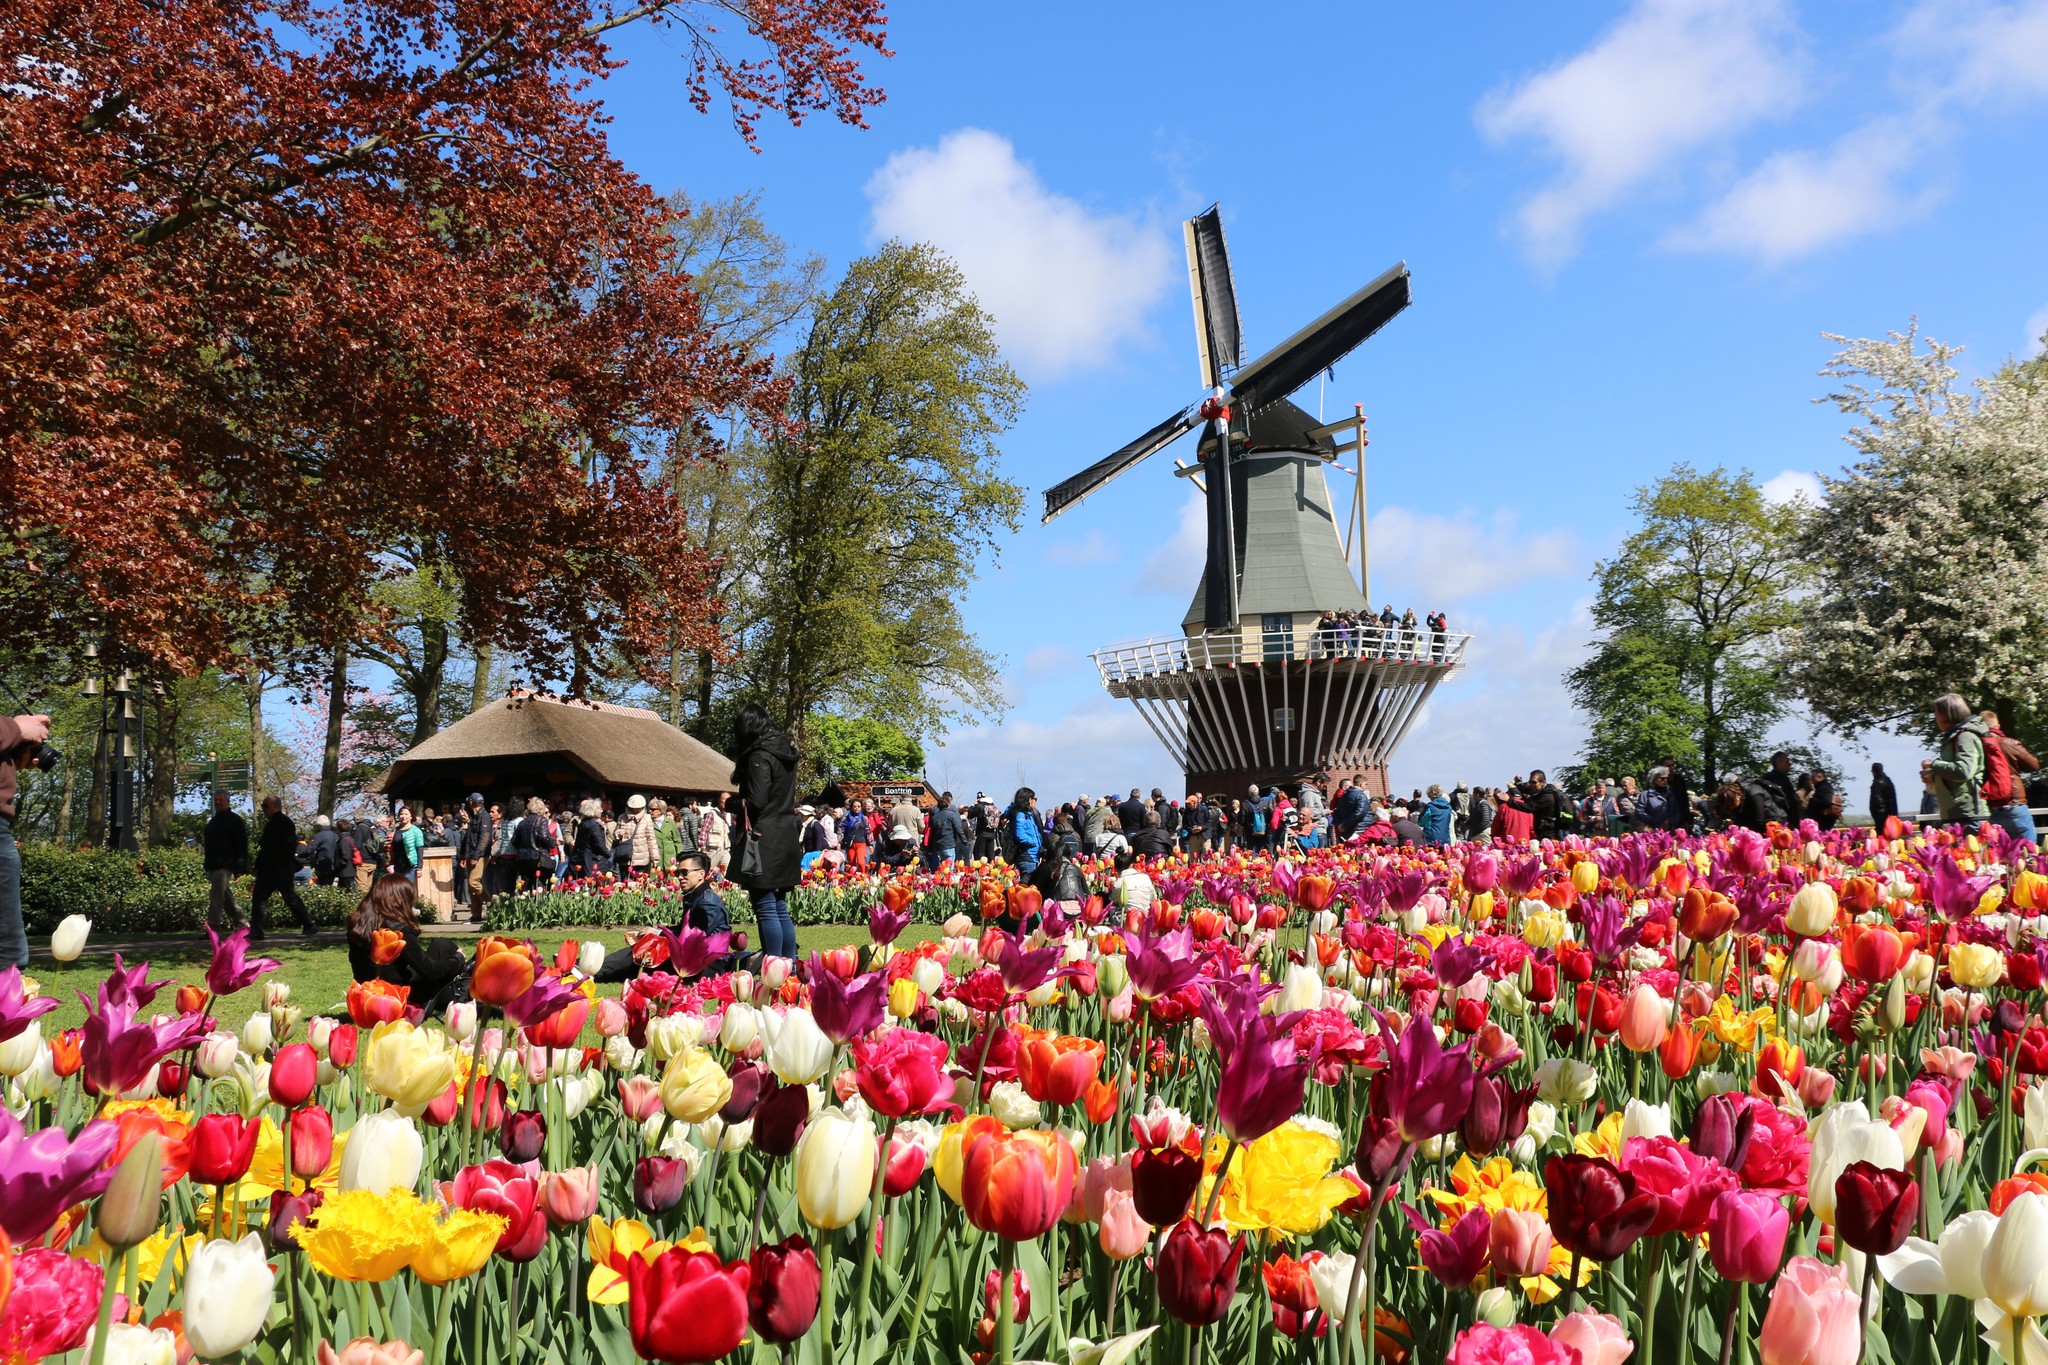 In 4 months, the tulip season will start in the Netherlands 🌷. We cannot wait for the cheerful spring flowers to bloom again. The Tulip Festival starts on 23 March and lasts until 14 May 2023.

Plan your visit to the tulips on:
> www.tulipfestivalamsterdam.com

#tulips #keukenhof #hollandtrip #amazingplaces #bucketlist #netherlands #flowers #loveflowers #flowersofinstagram #windmill #dutch #tulipas #spring #printemps #primavera #amsterdam #郁金香 #